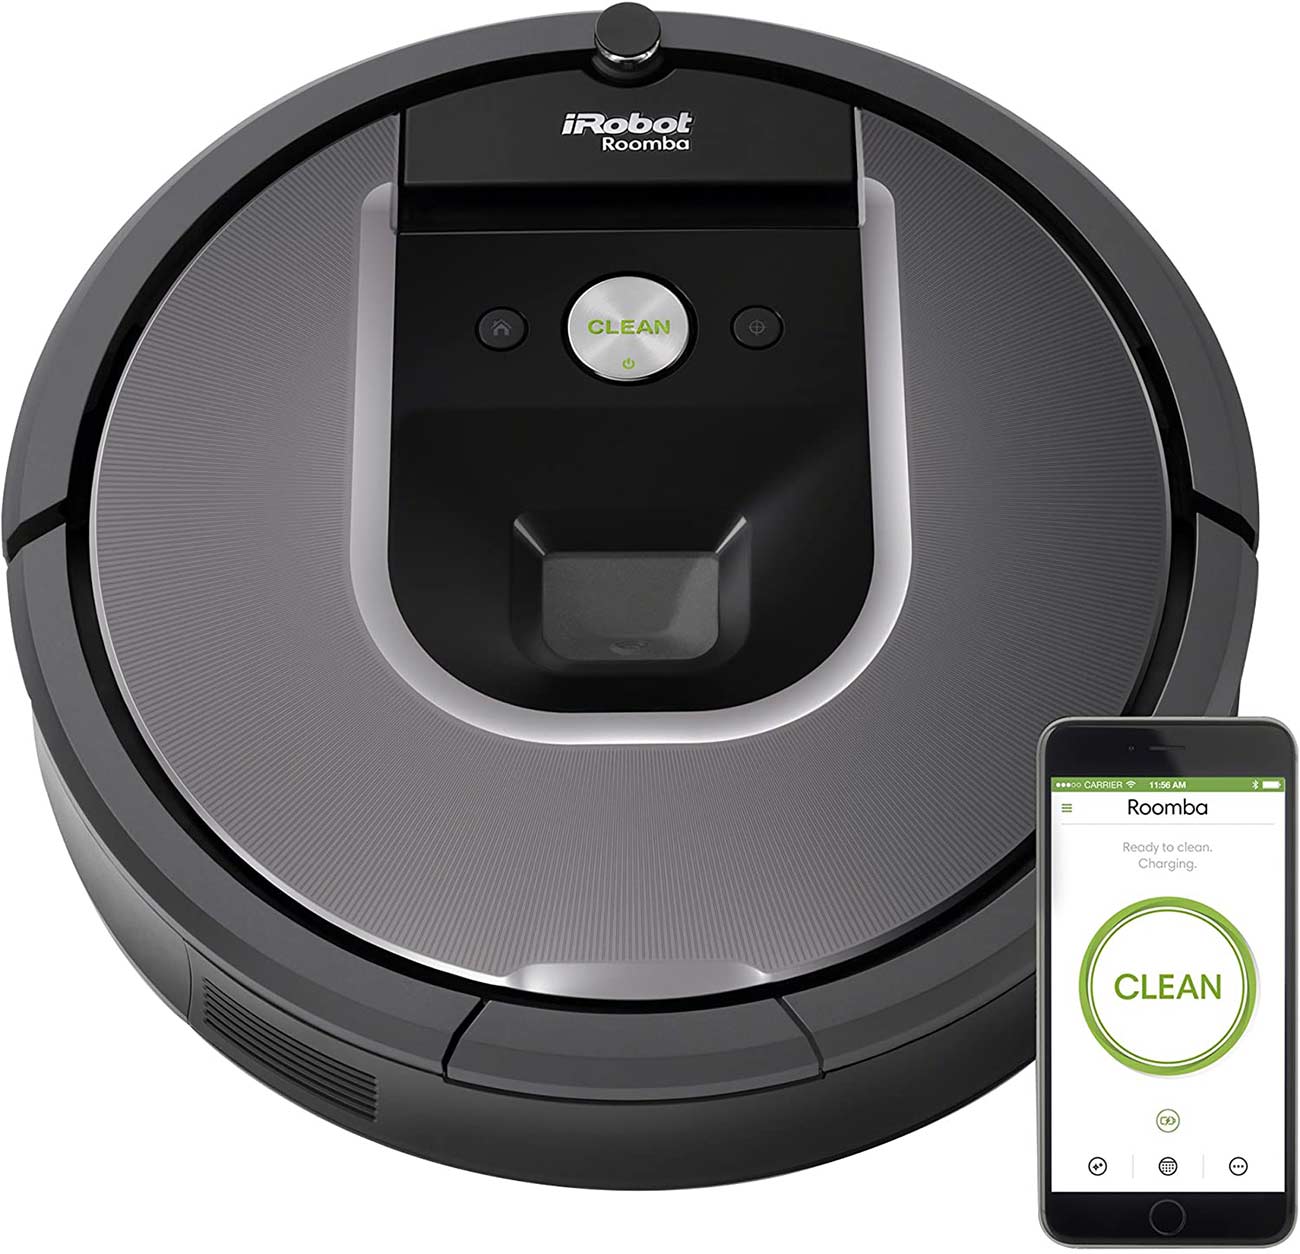 Is Rooma iRobot Charged?